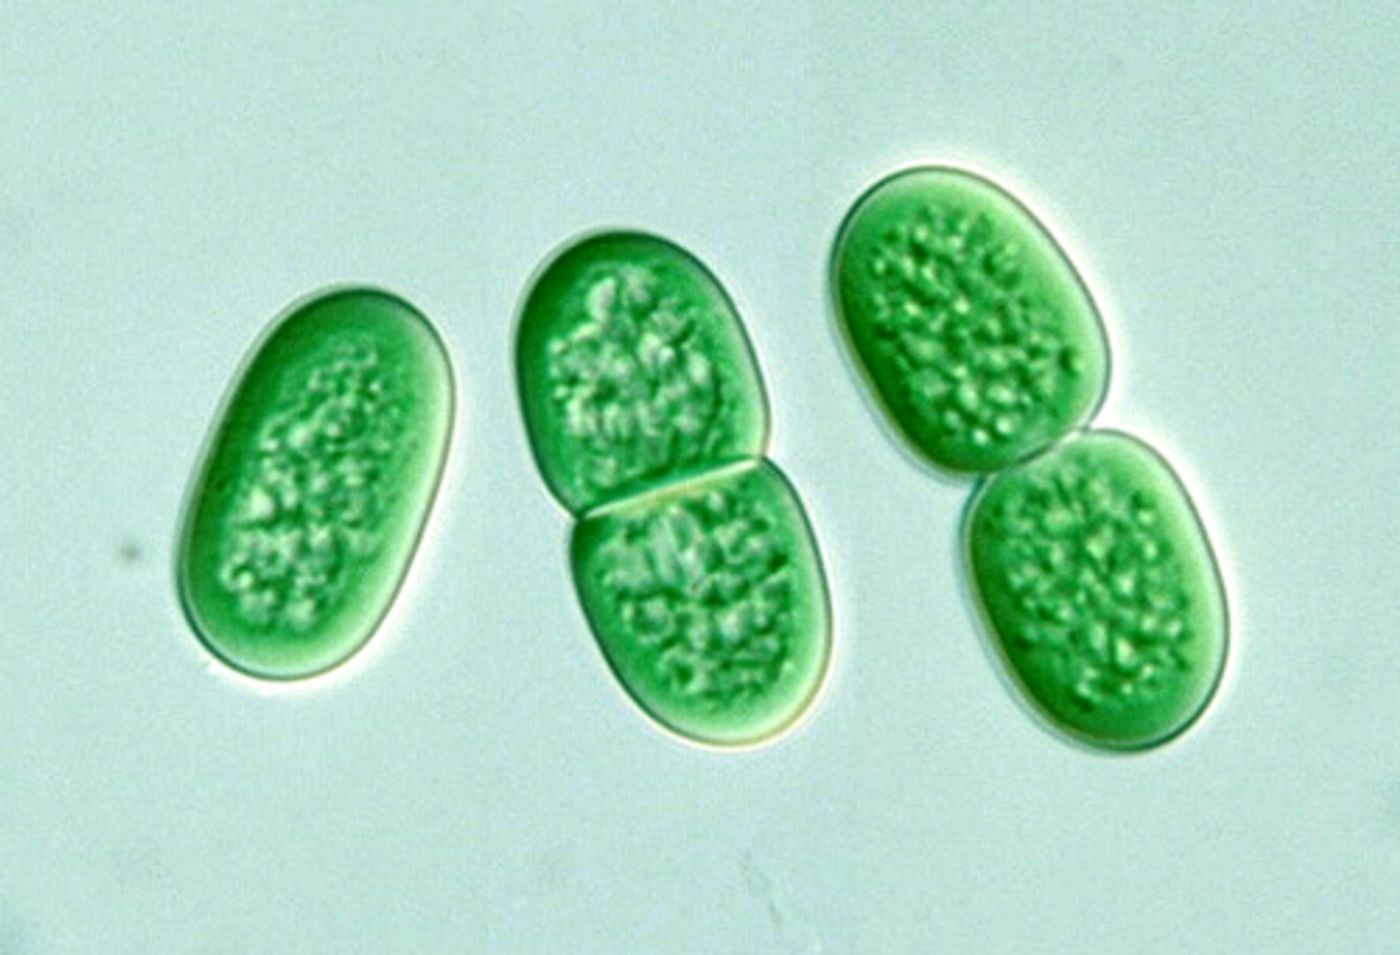 These cyanobacteria divide by binary fission.